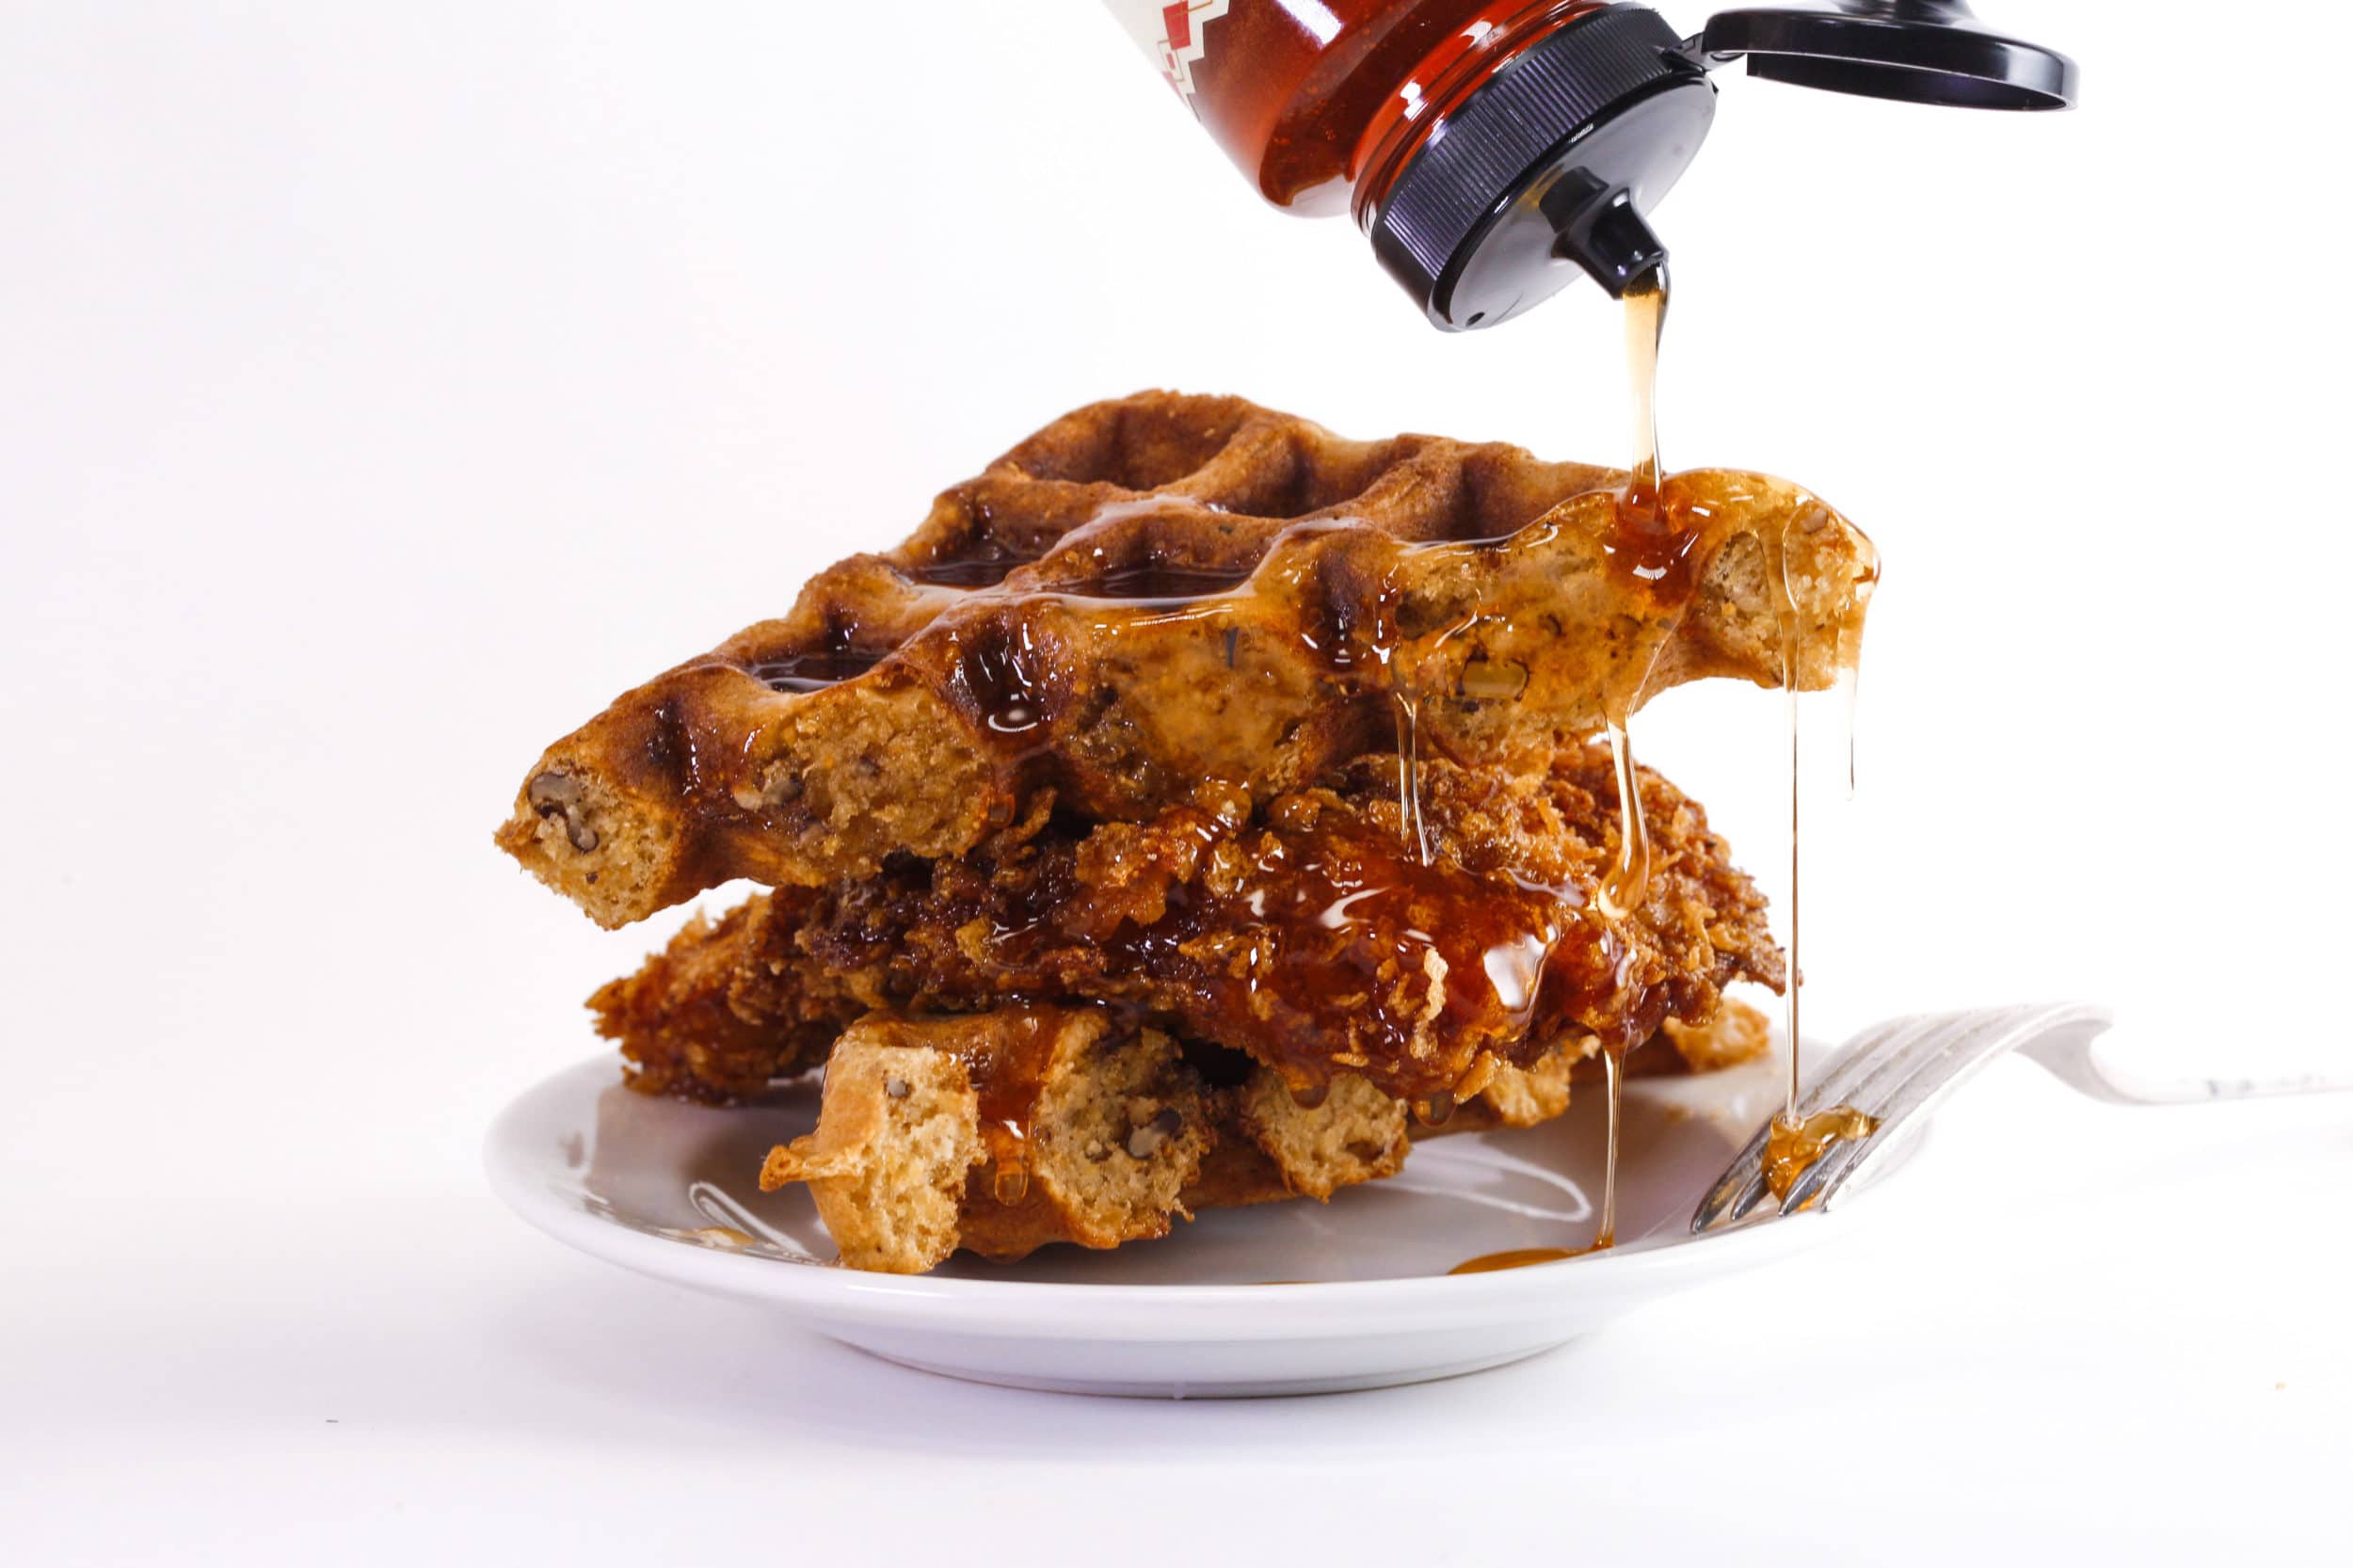 Rachael's Cornflake-Fried Chicken and Waffles with Pecans